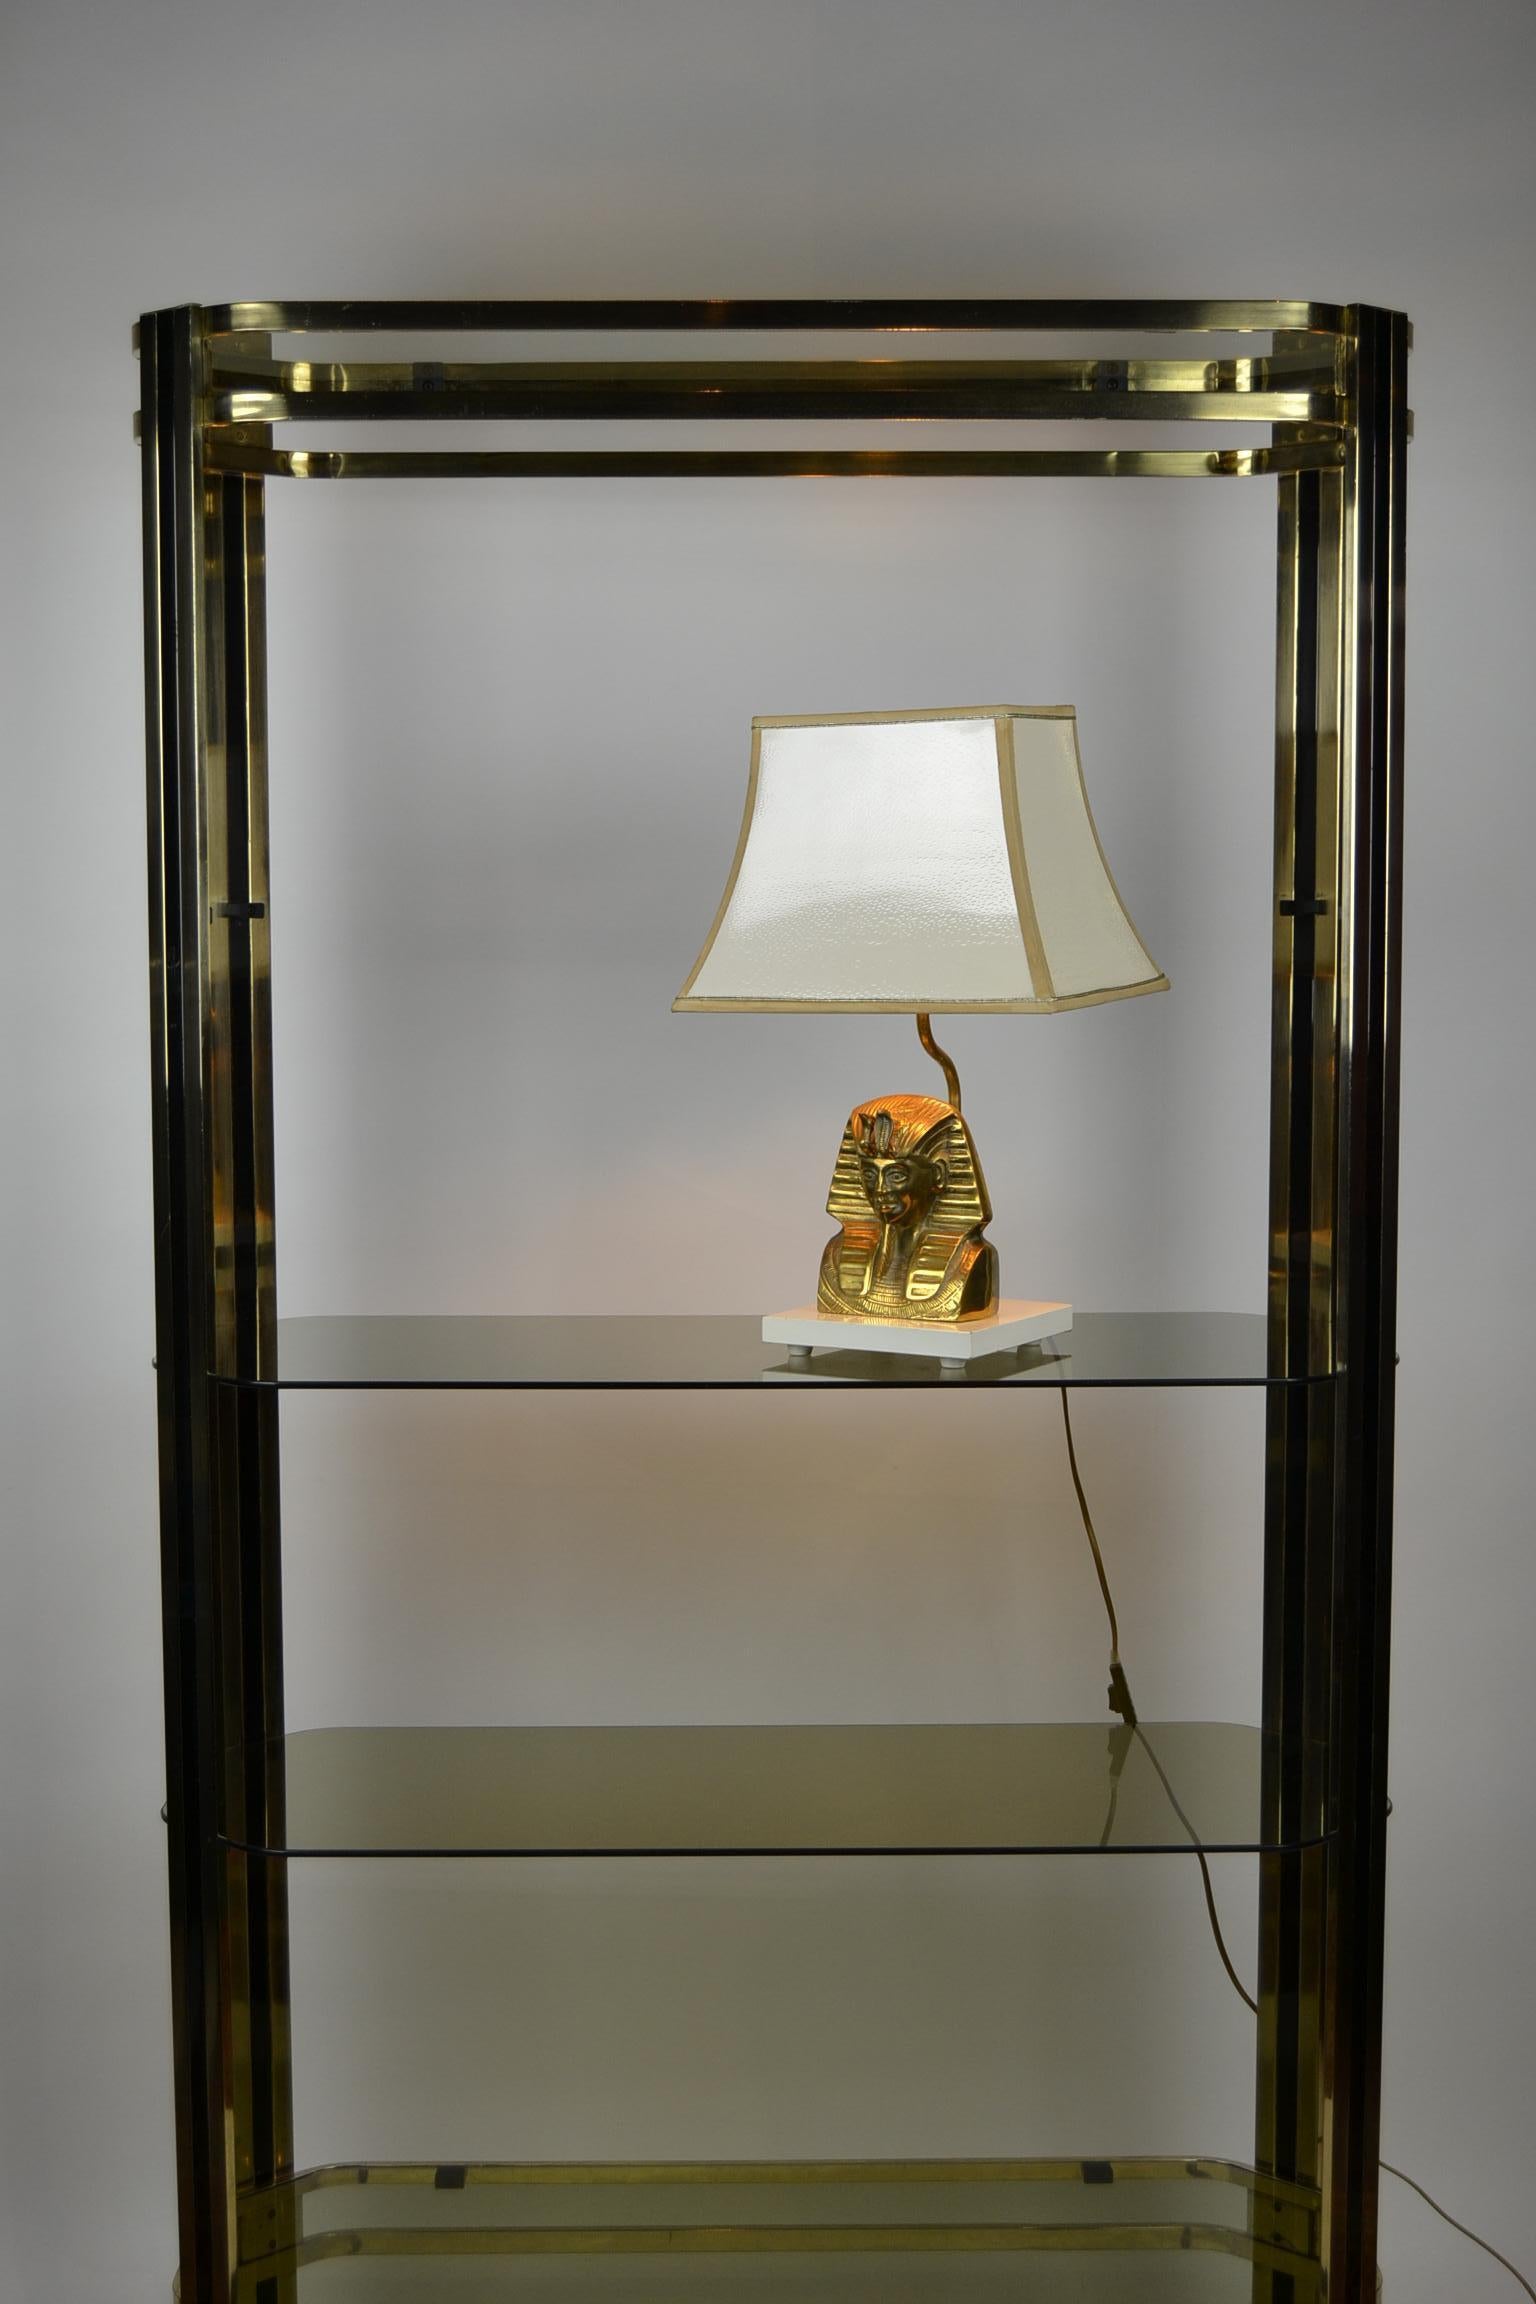 Pharaoh Head Table Lamp. 
This vintage table lamp or desk lamp dates from the 1970s.
It's a brass Pharaoh head sculpture on a white lacquered wooden base.
It has a white shiny lampshade which has the visual of an ostrich leather pattern.
It's gold